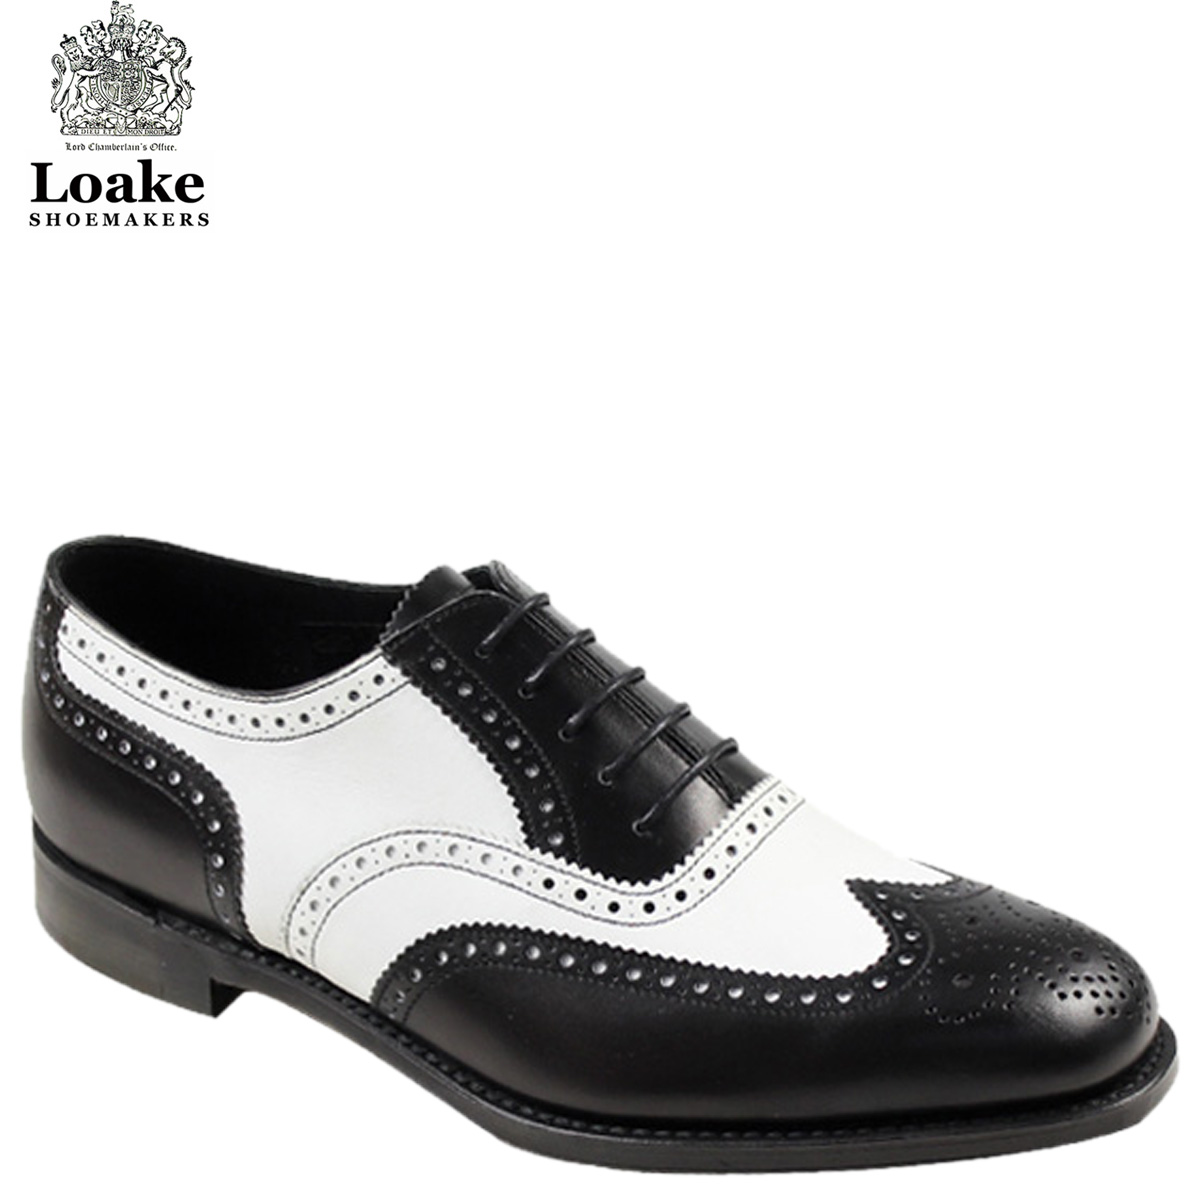 black and white wingtips shoes